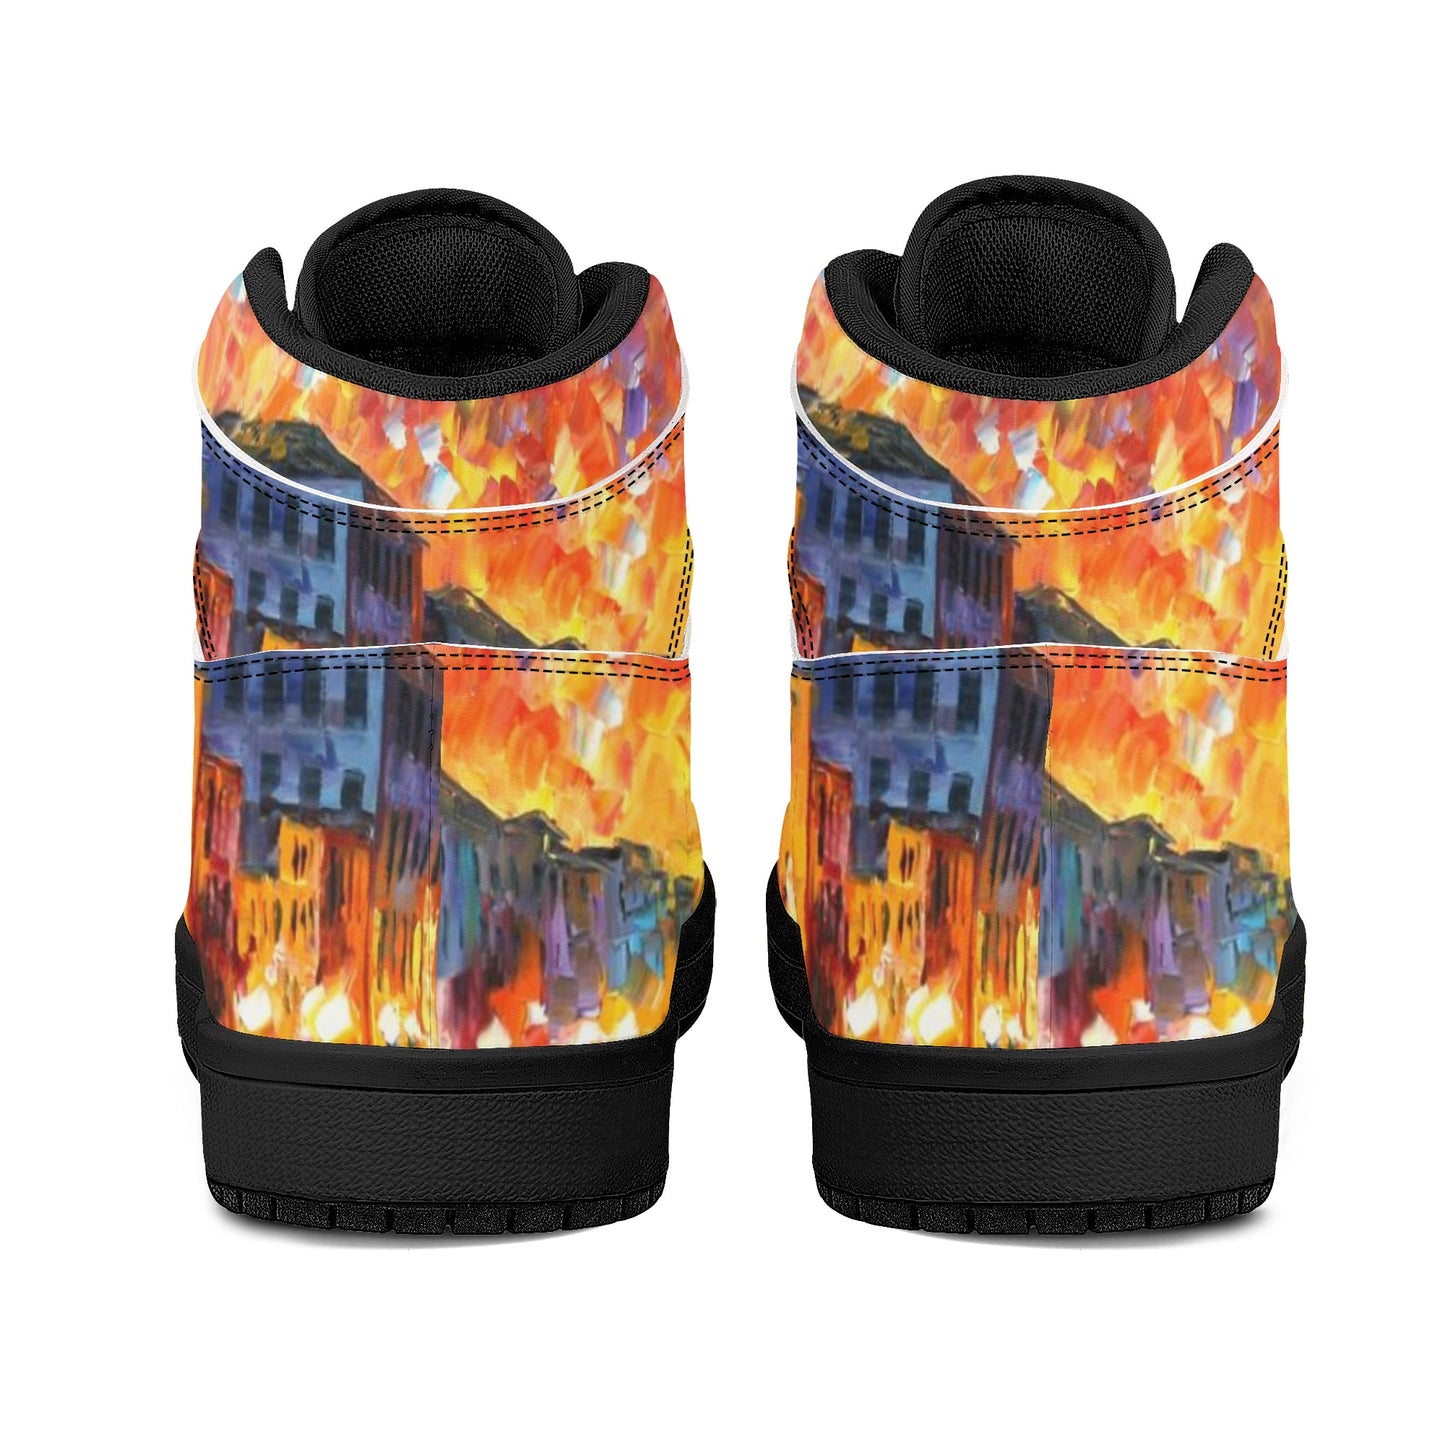 Men's High Top Leather Sneakers Afremov VENICE - GRAND CANAL